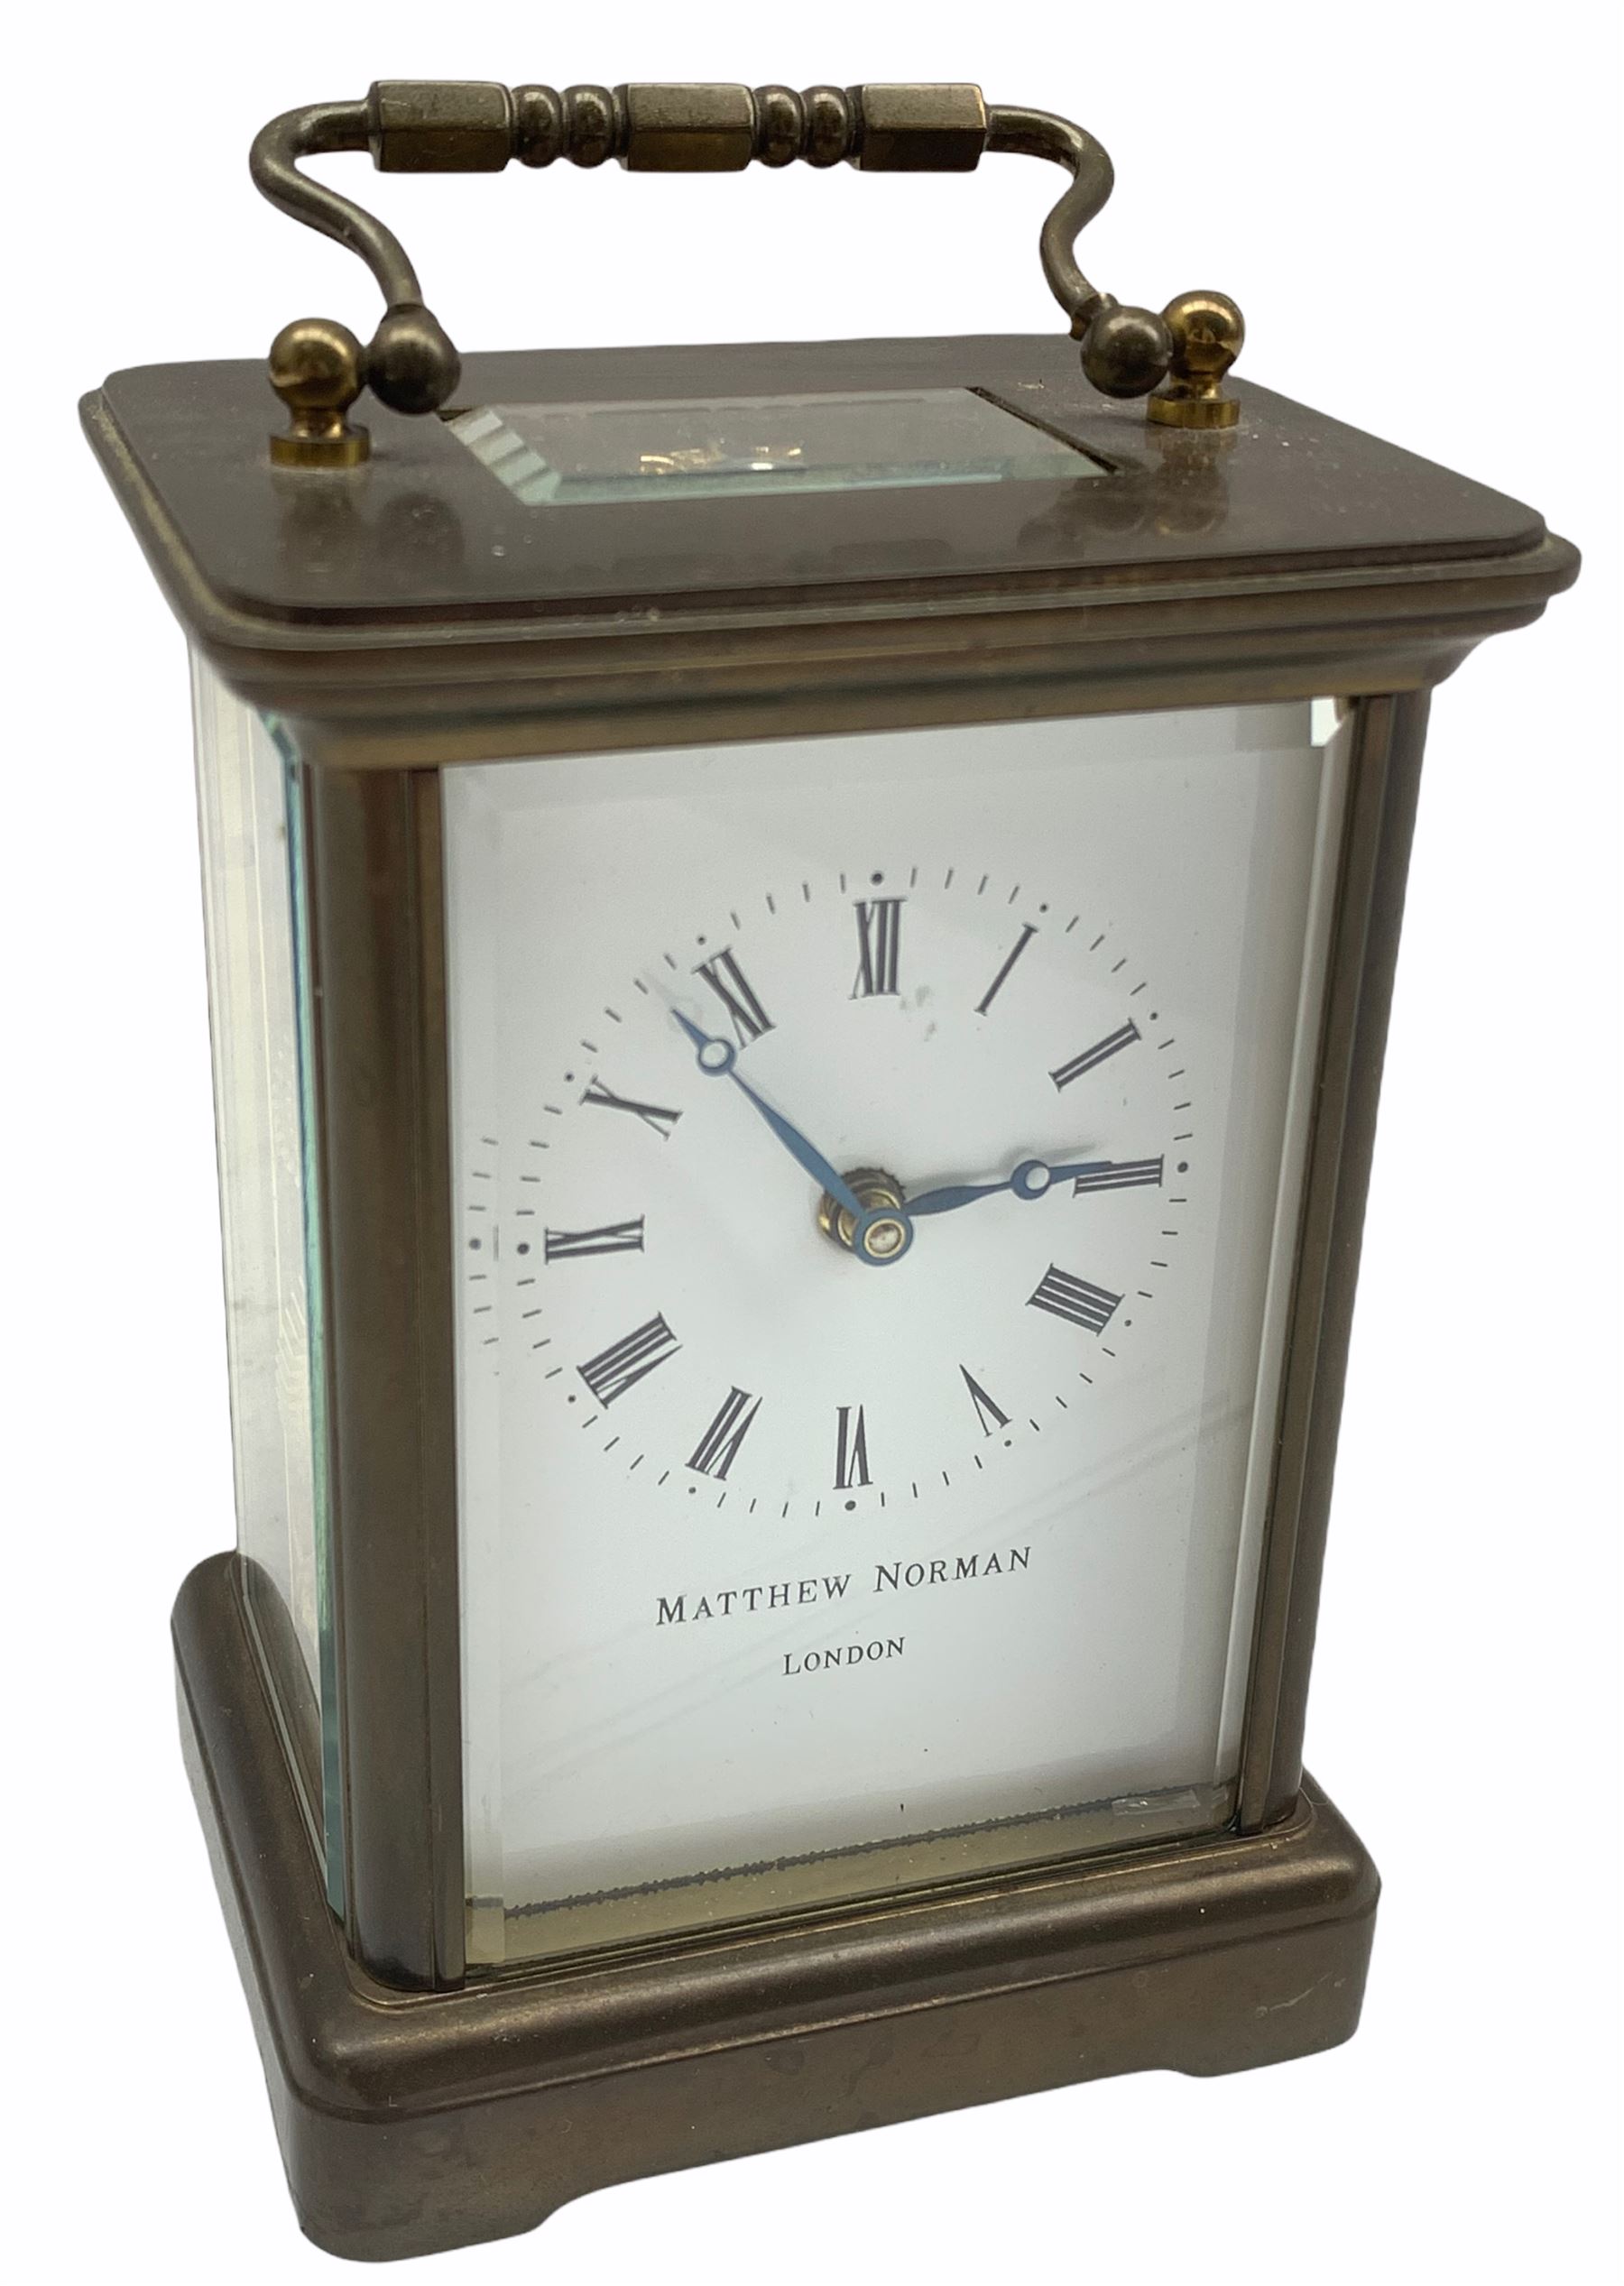 20th century Matthew Norman eight-day timepiece Carriage Clock with a lever platform escapement